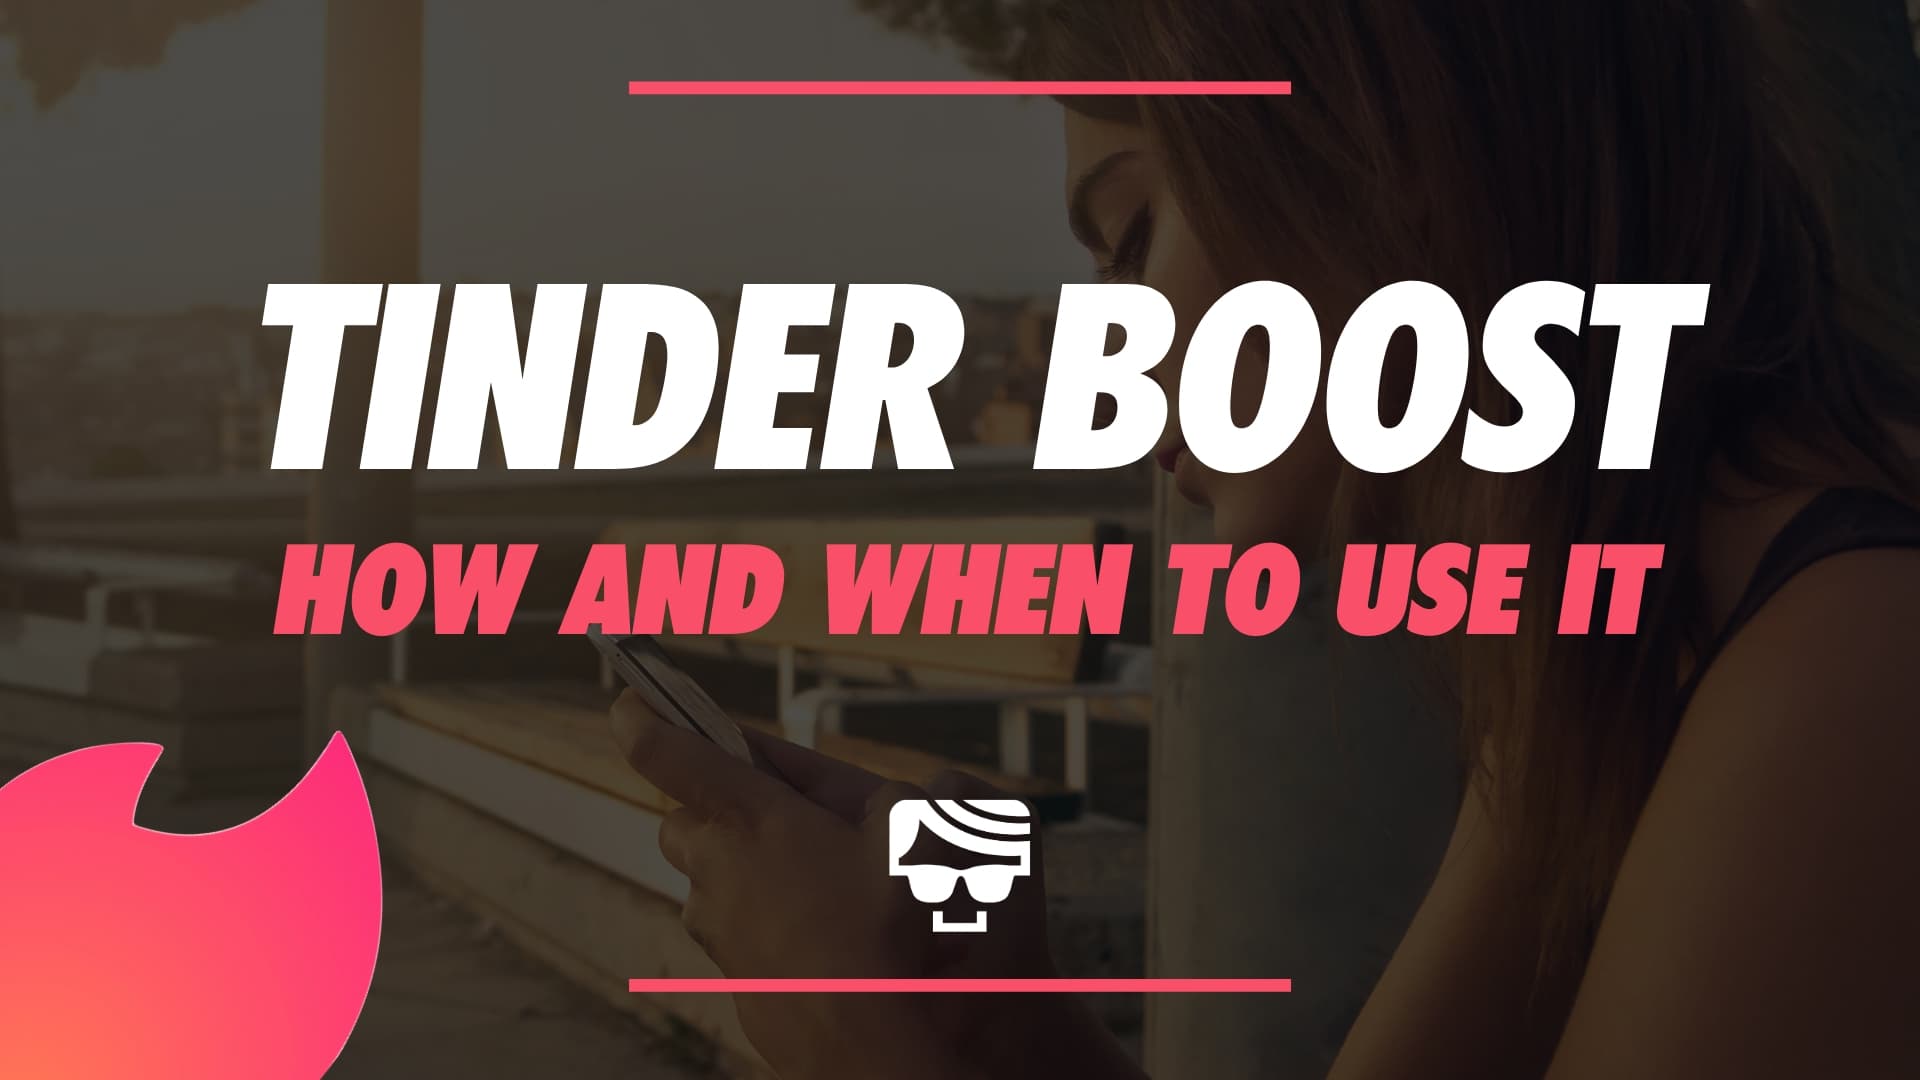 Tinder Boost Explained: What It Is, When To Use It, And 2023 Pricing (+ Super Boost)